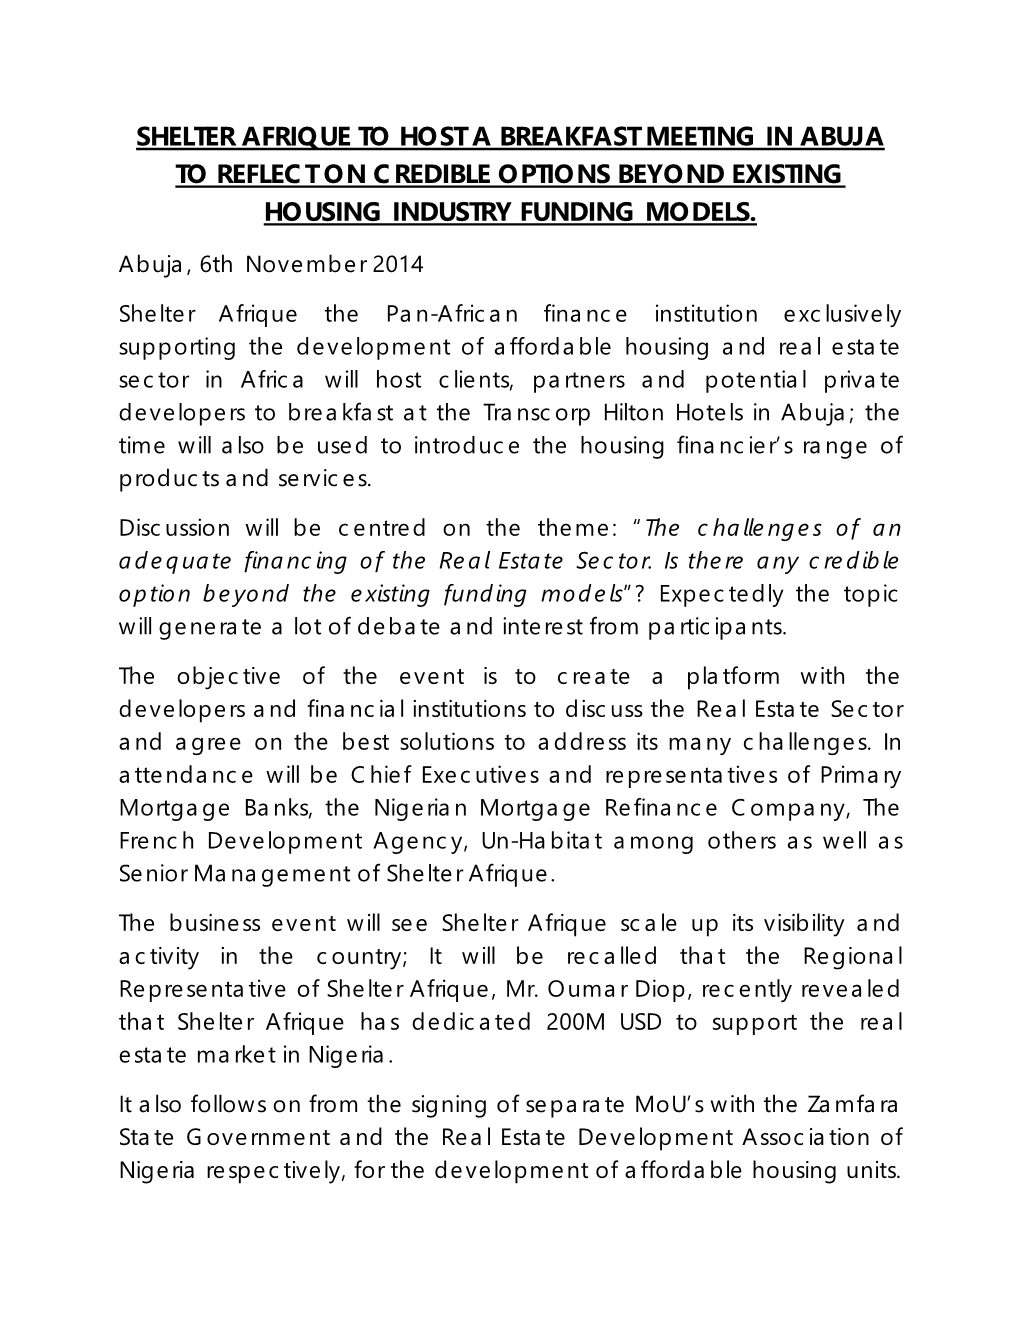 Shelter Afrique to Host a Breakfast Meeting in Abuja to Reflect on Credible Options Beyond Existing Housing Industry Funding Models